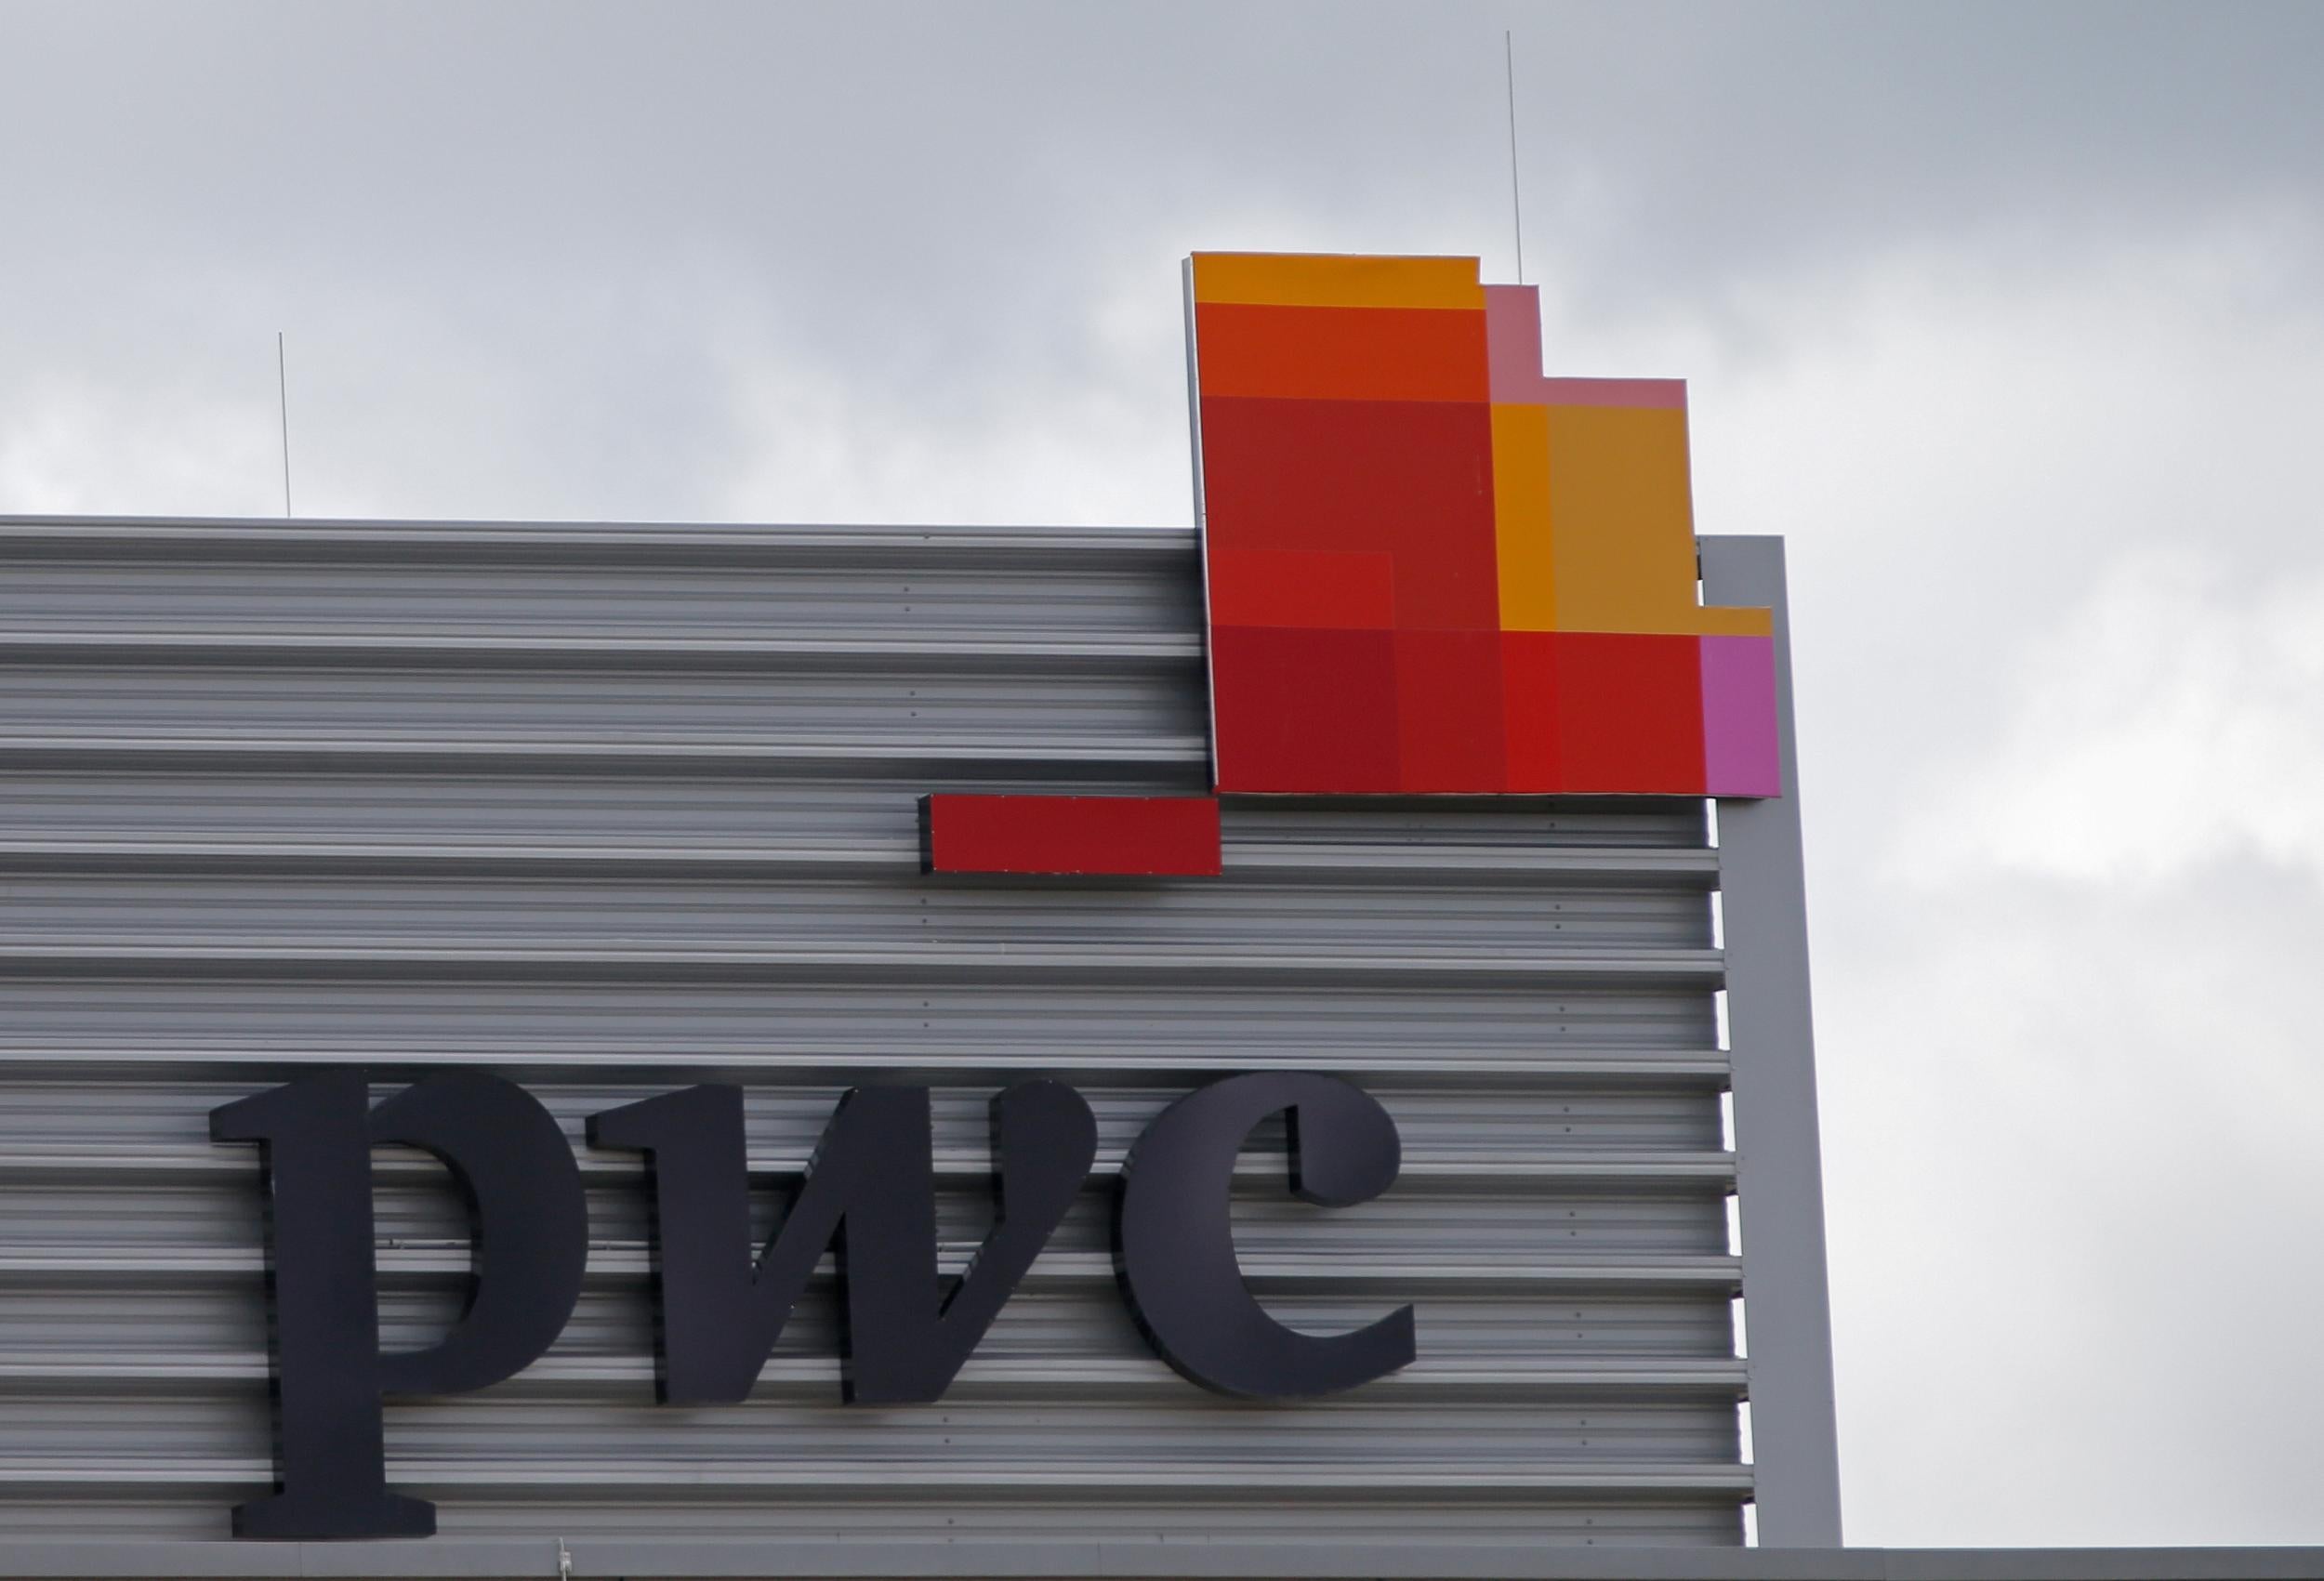 PricewaterhouseCoopers says black and minority ethnic workers earn less but wants to address the issue